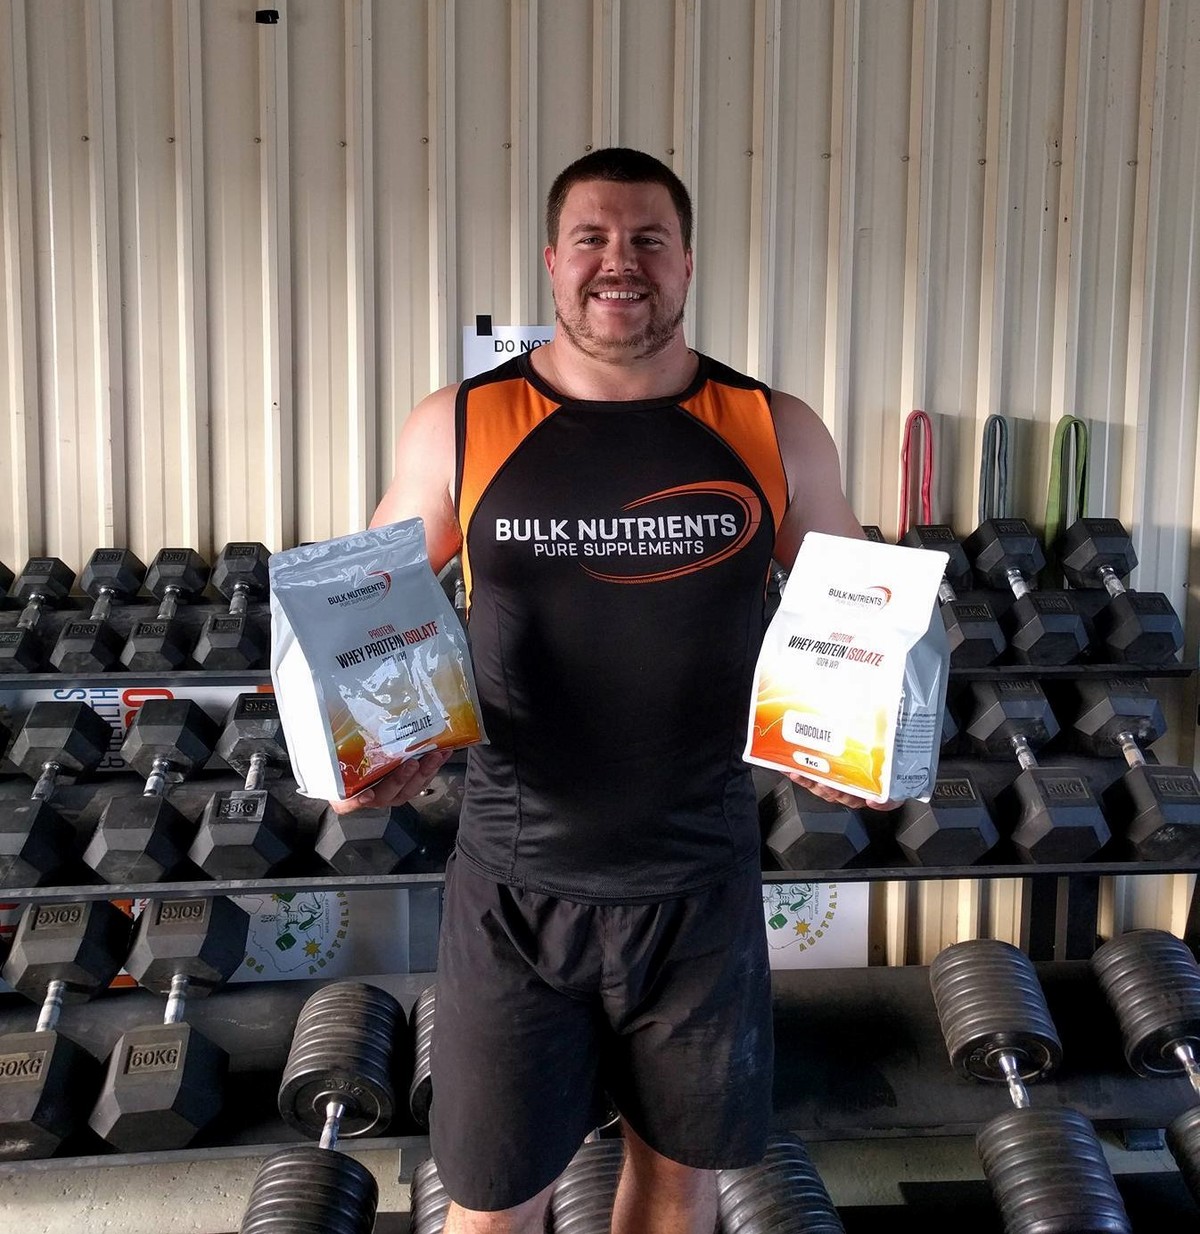 Dave Napper's favourite protein source is Whey Protein Isolate.